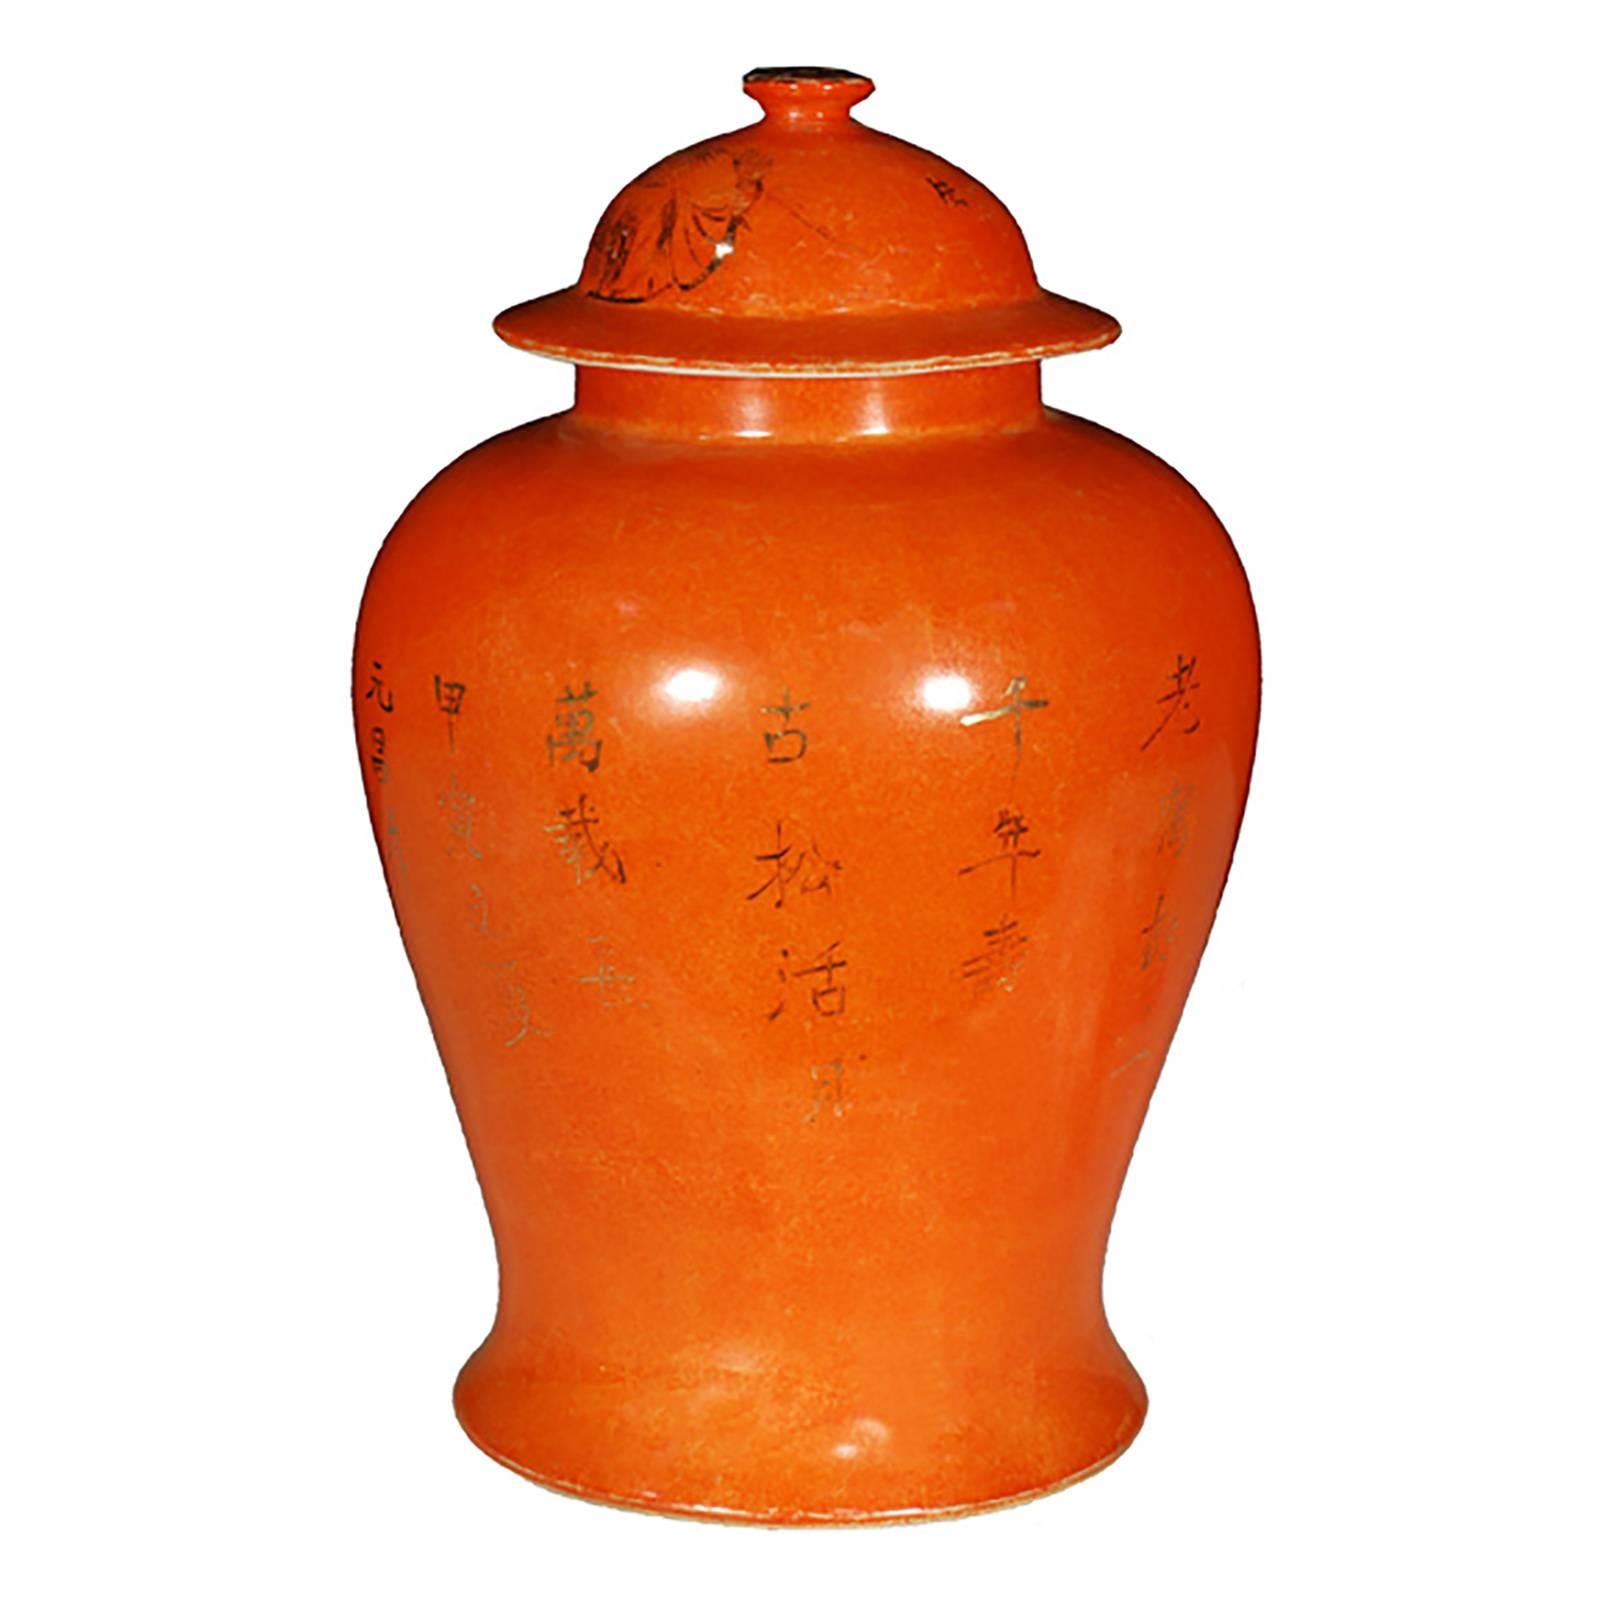 When this unique jar was made in the 1920s, the world was in the middle of a new artistic movement called Art Deco: it combined many different motifs, including the exotic styles of ancient Egypt, India, and especially China. This design arose from